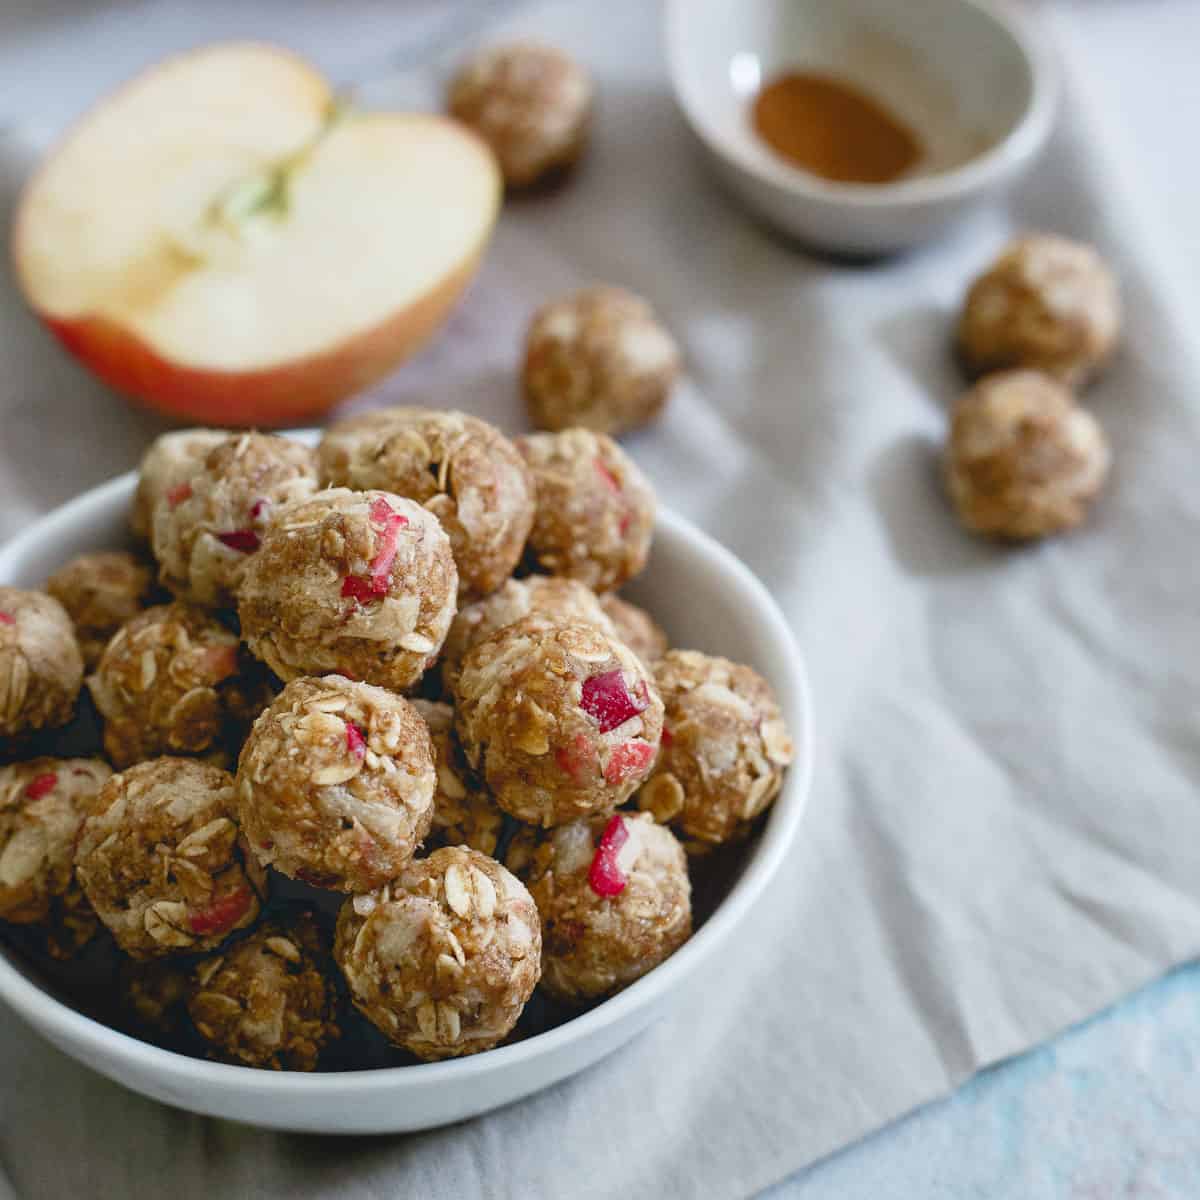 These apple cinnamon cookie bites are made with oats, cashew butter and real pieces of fresh apples. They're packed with cinnamon flavor and taste like a chewy sweet cookie!